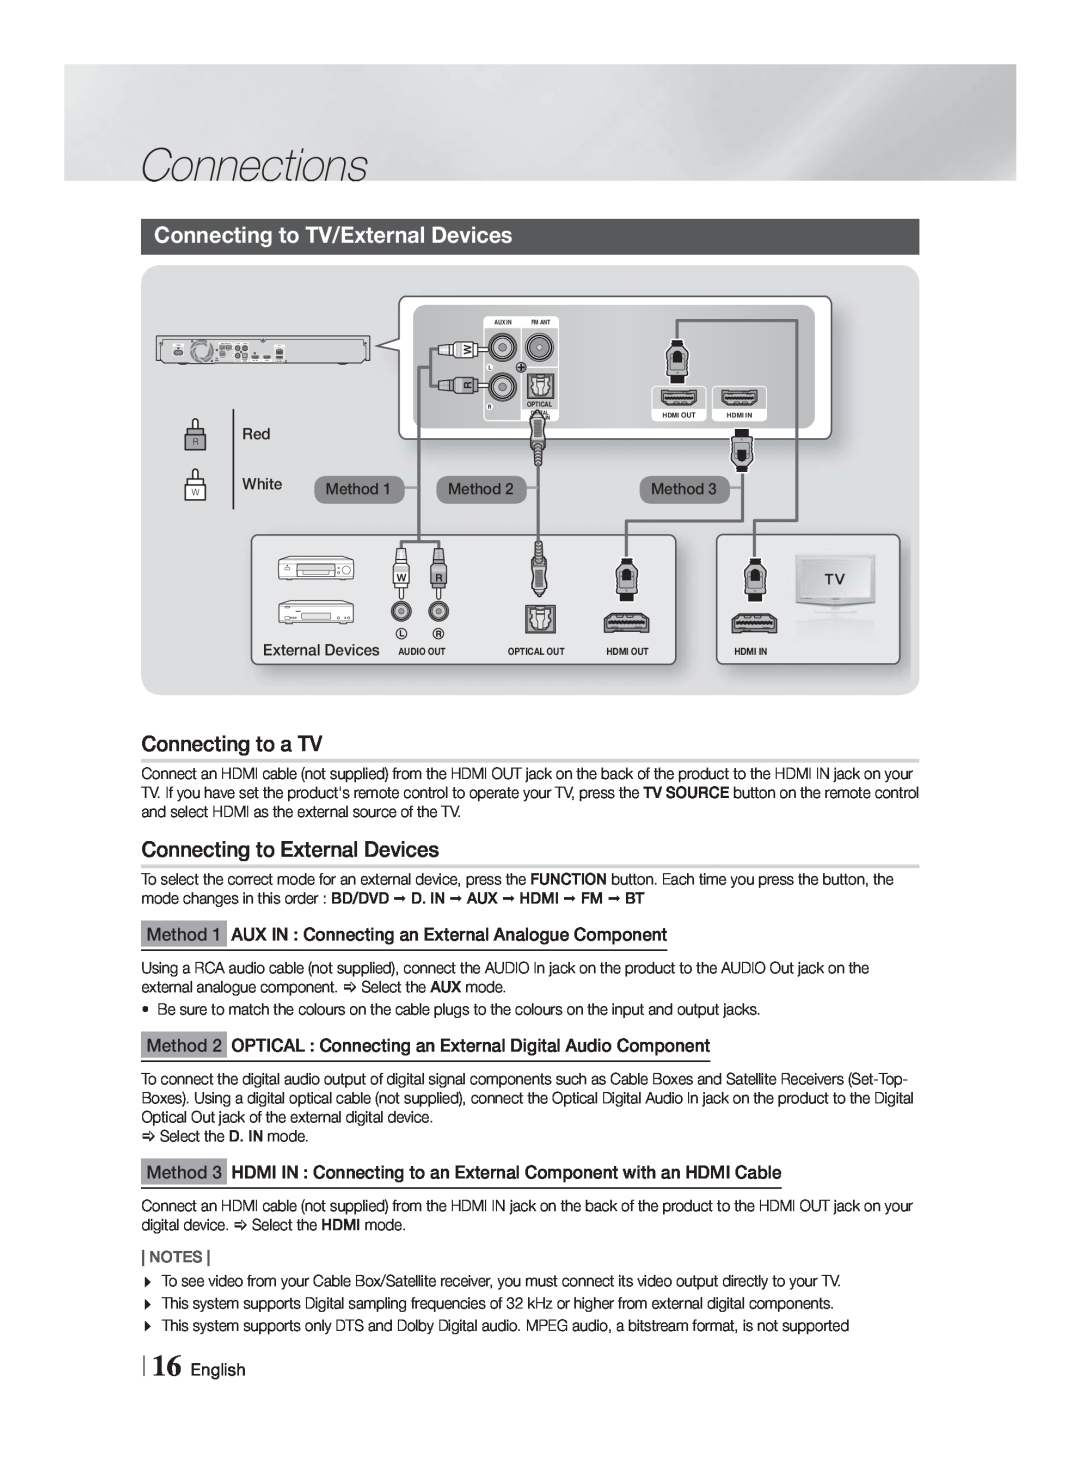 Samsung HT-FS5200/XN manual Connecting to TV/External Devices, Connecting to a TV, Connecting to External Devices, English 